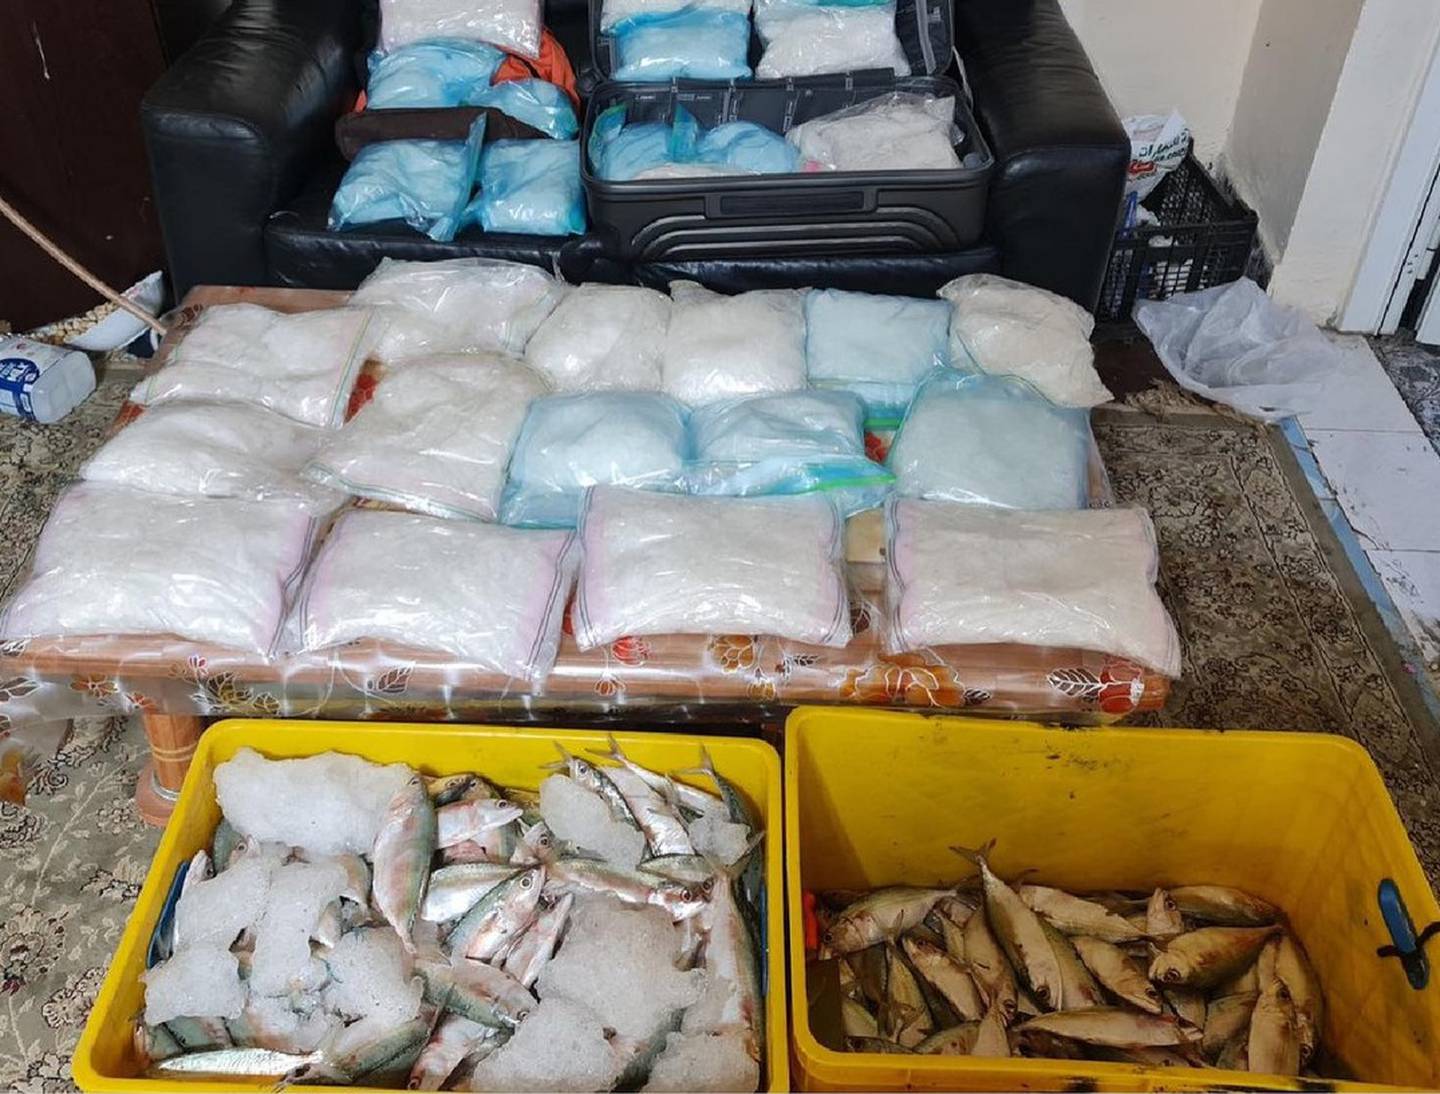 Officers found the drugs hidden inside a fish premises. Image: Abu Dhabi Police